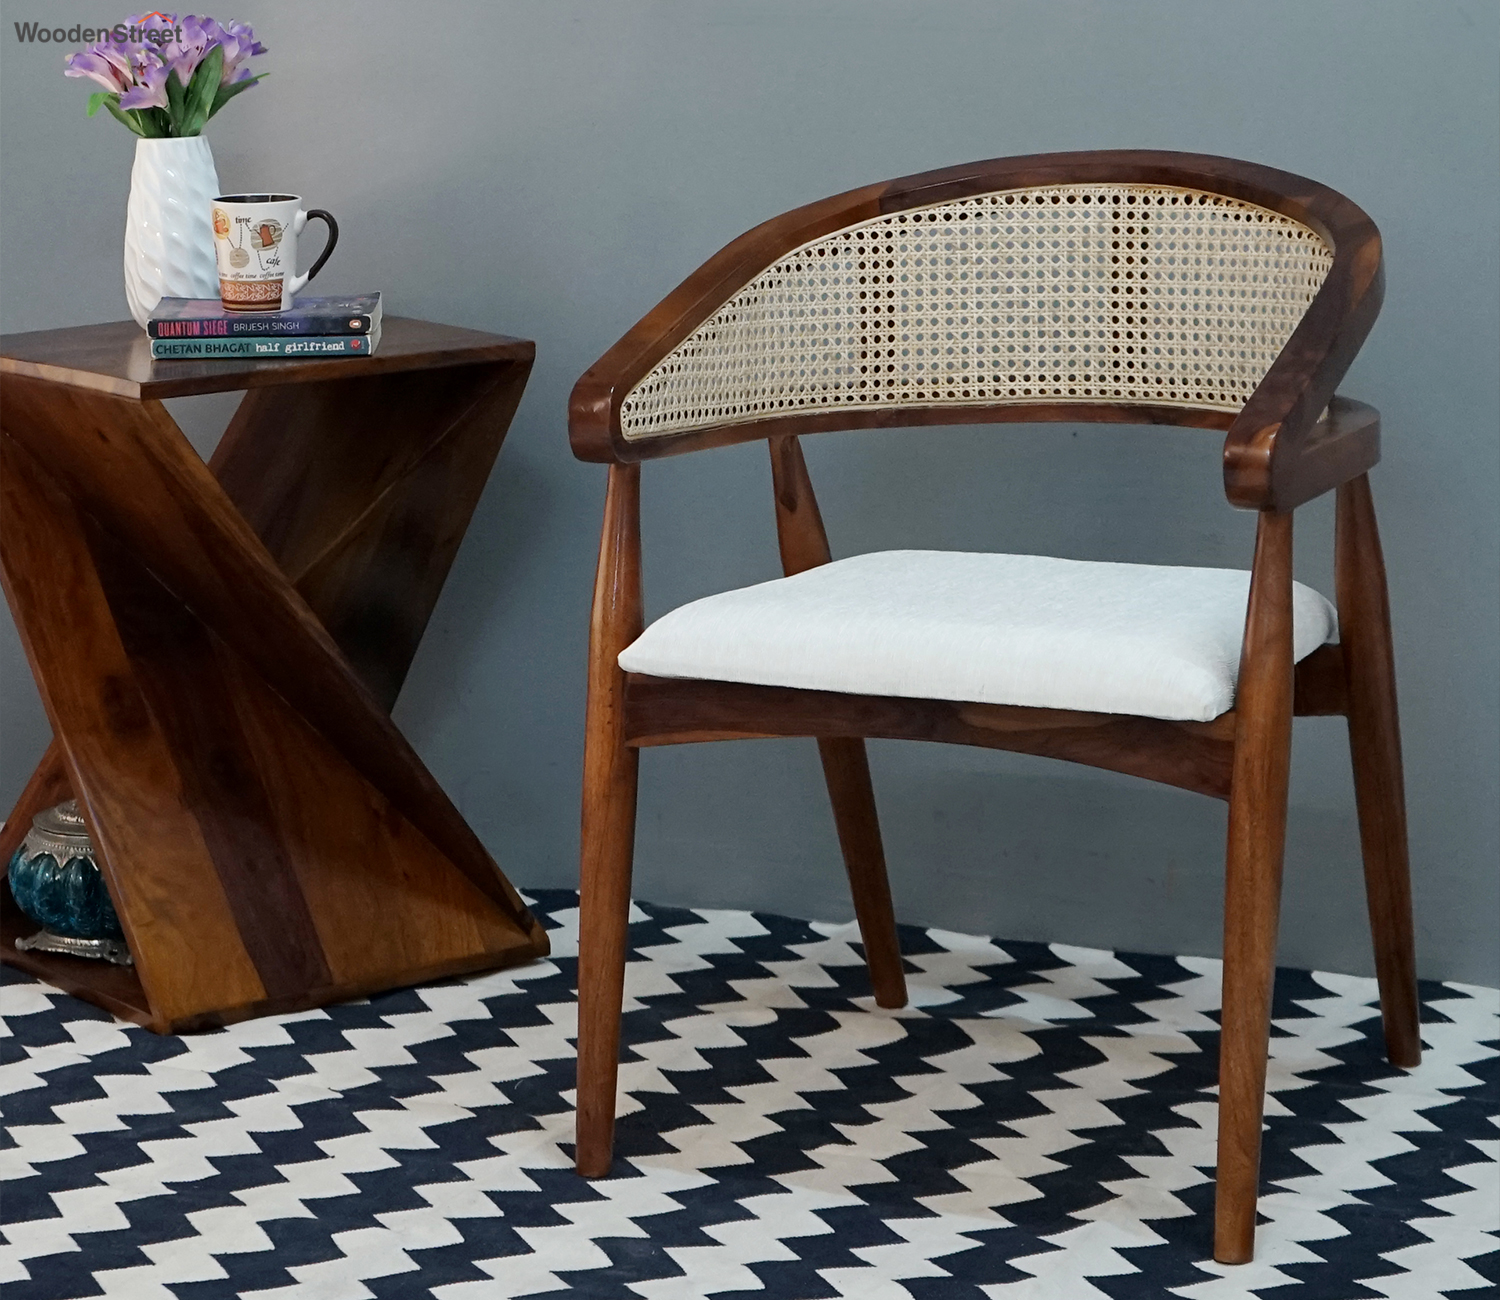 How wide should various dining chairs be?